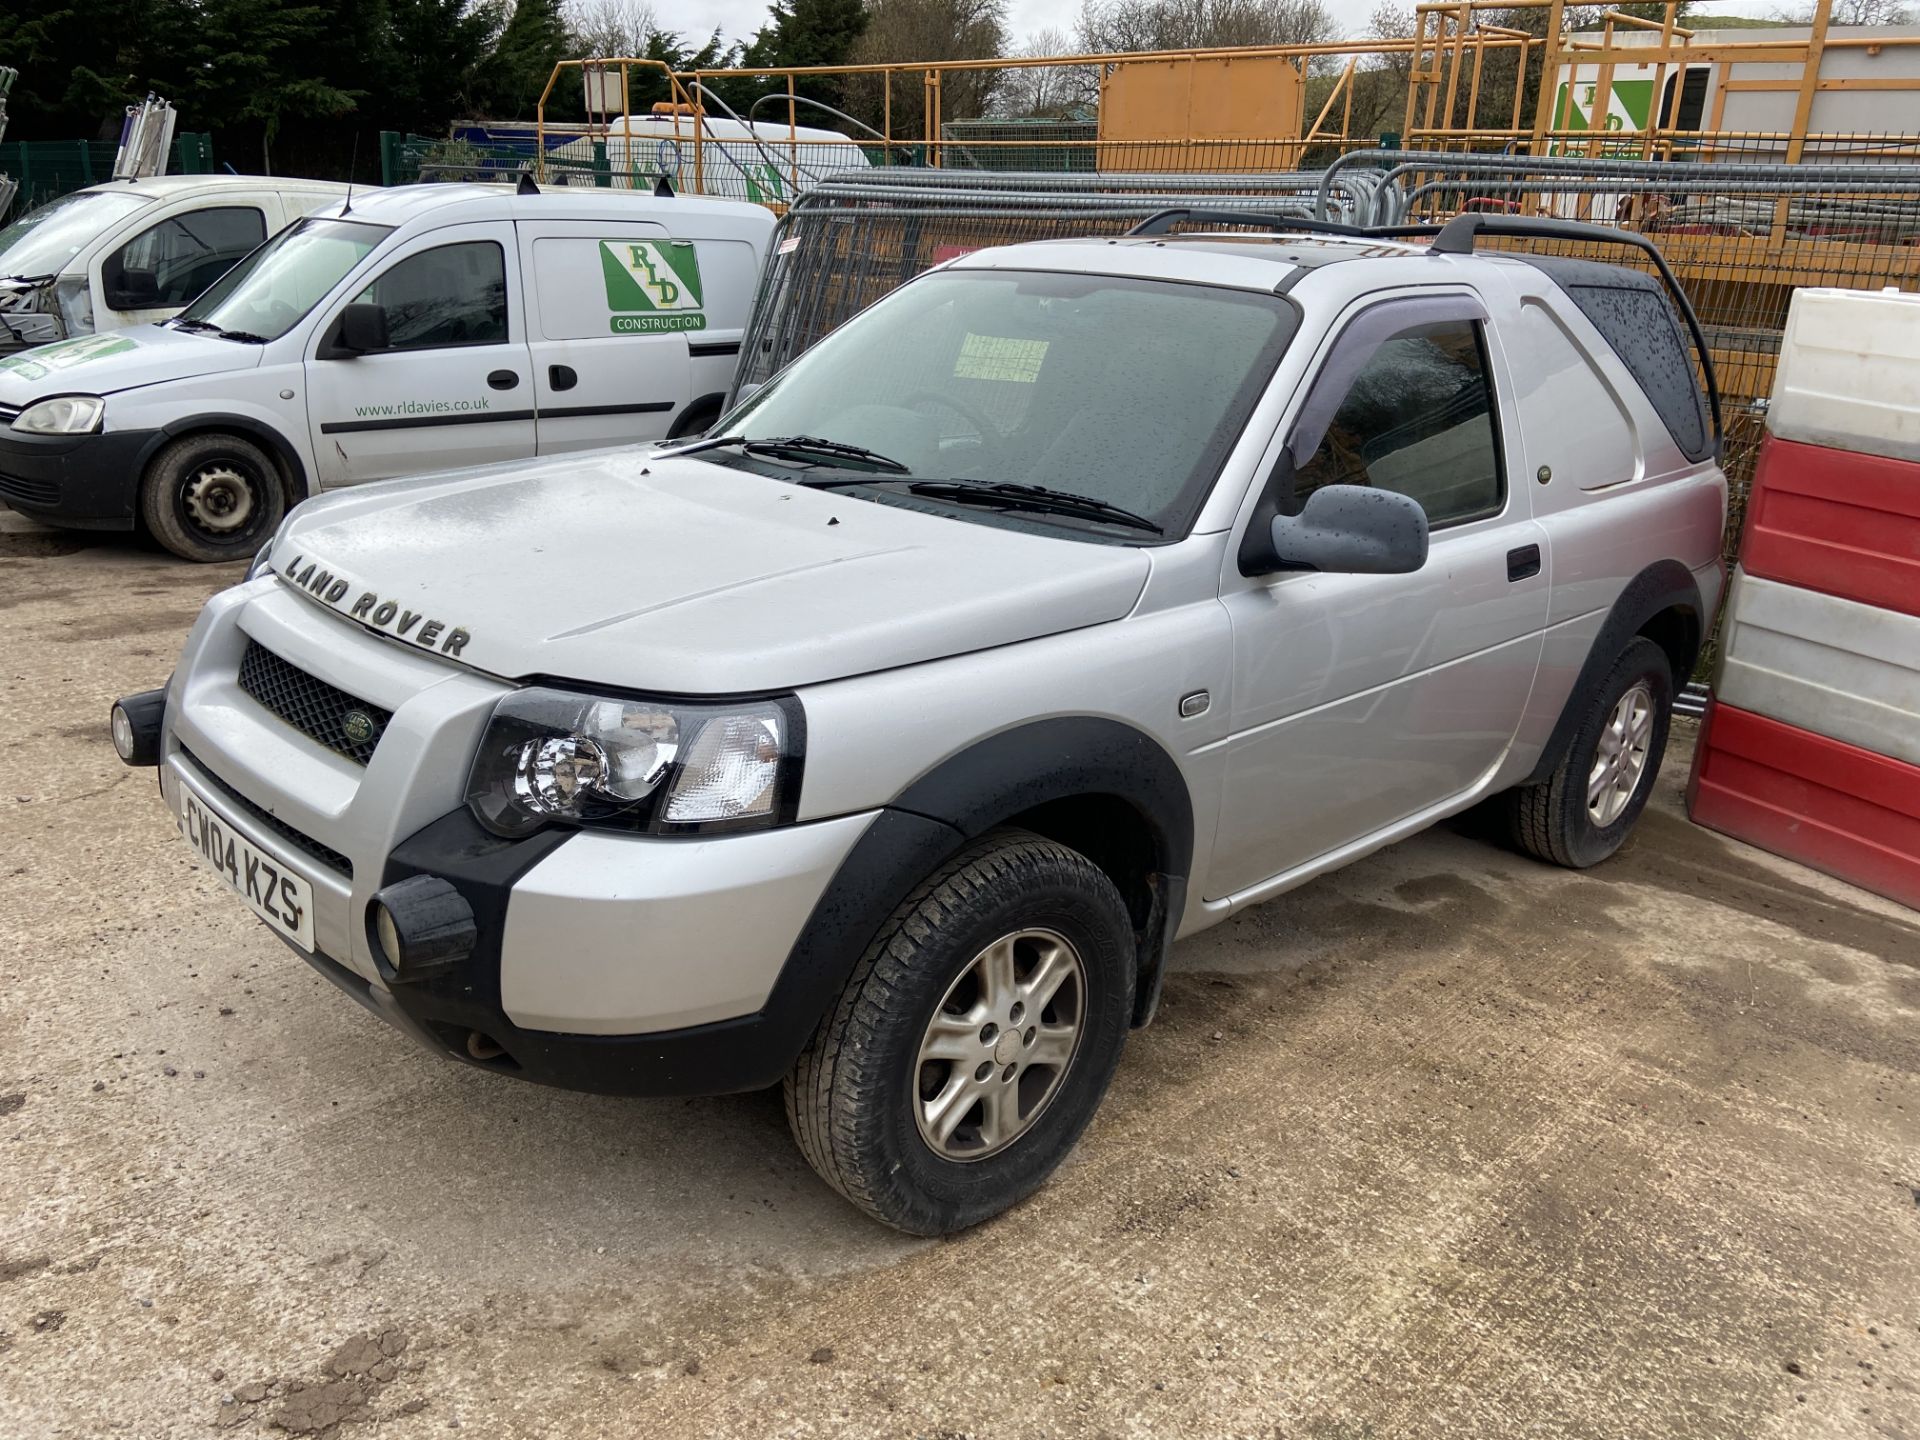 Land Rover Freelander TD4 SWB Light 4x4 Utility SUV, registration no. CW04 KZS, date first - Image 2 of 9